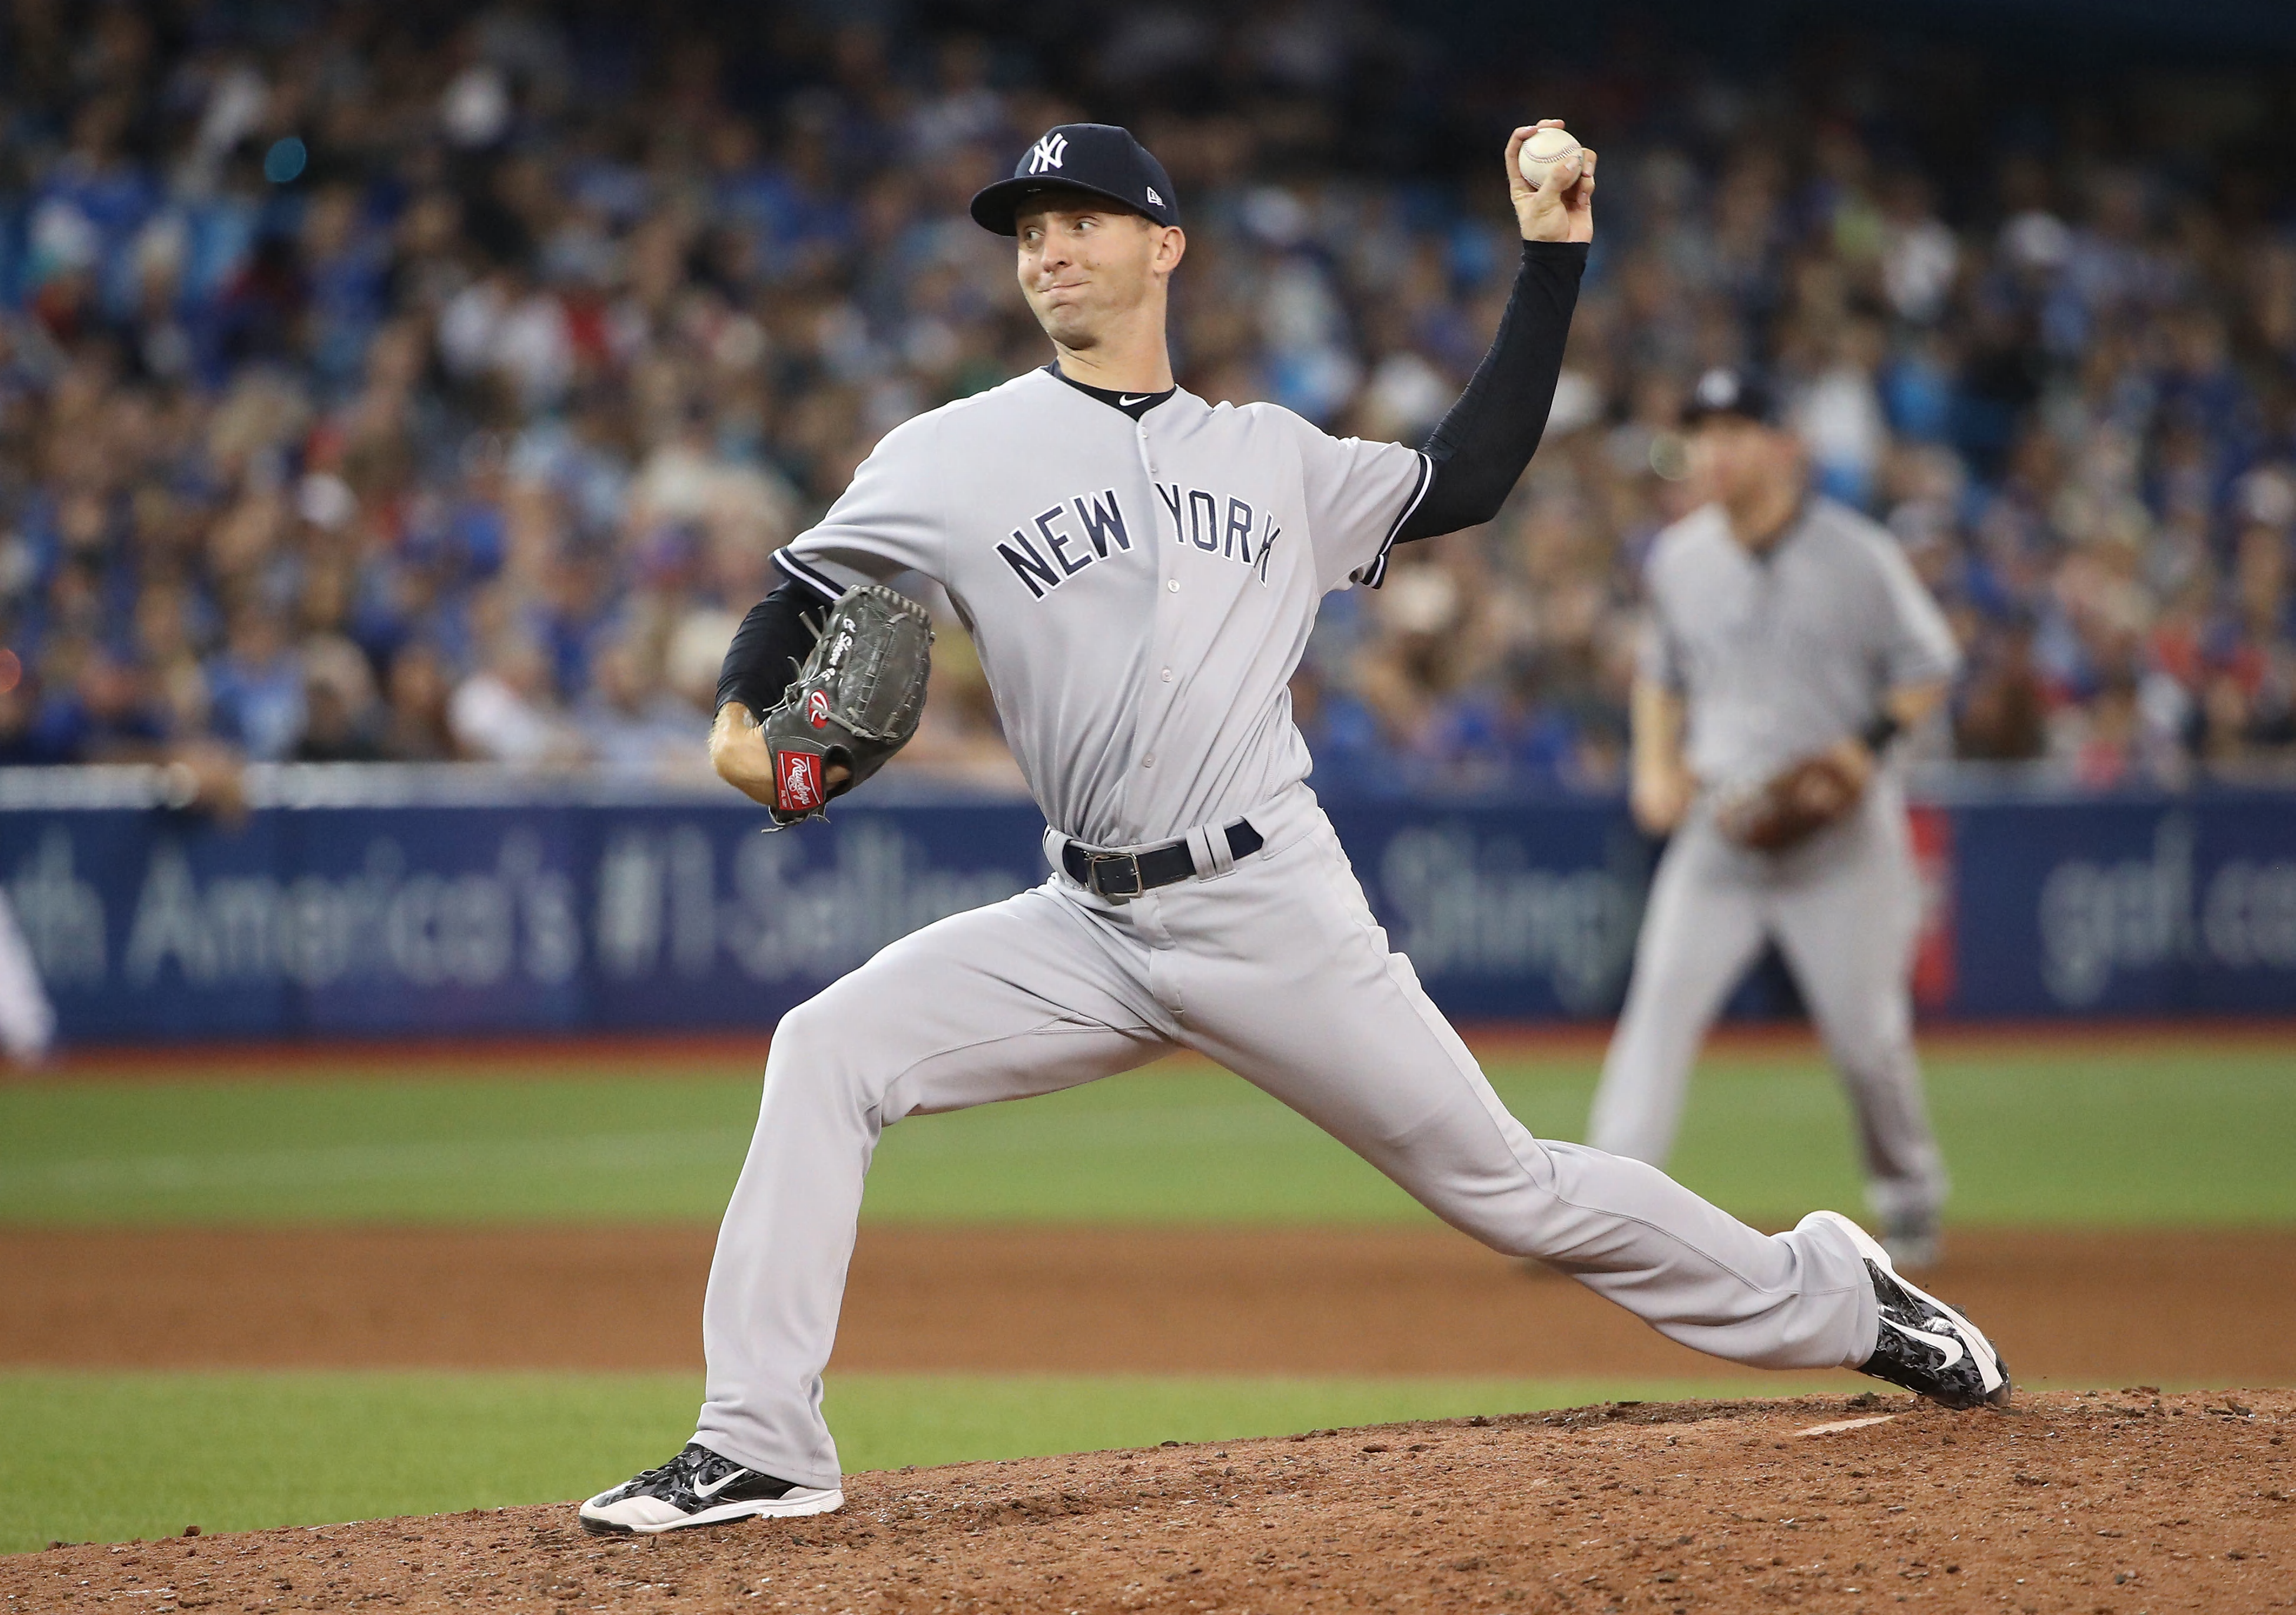 Relievers from the Yankees, Mets on what makes a good bullpen